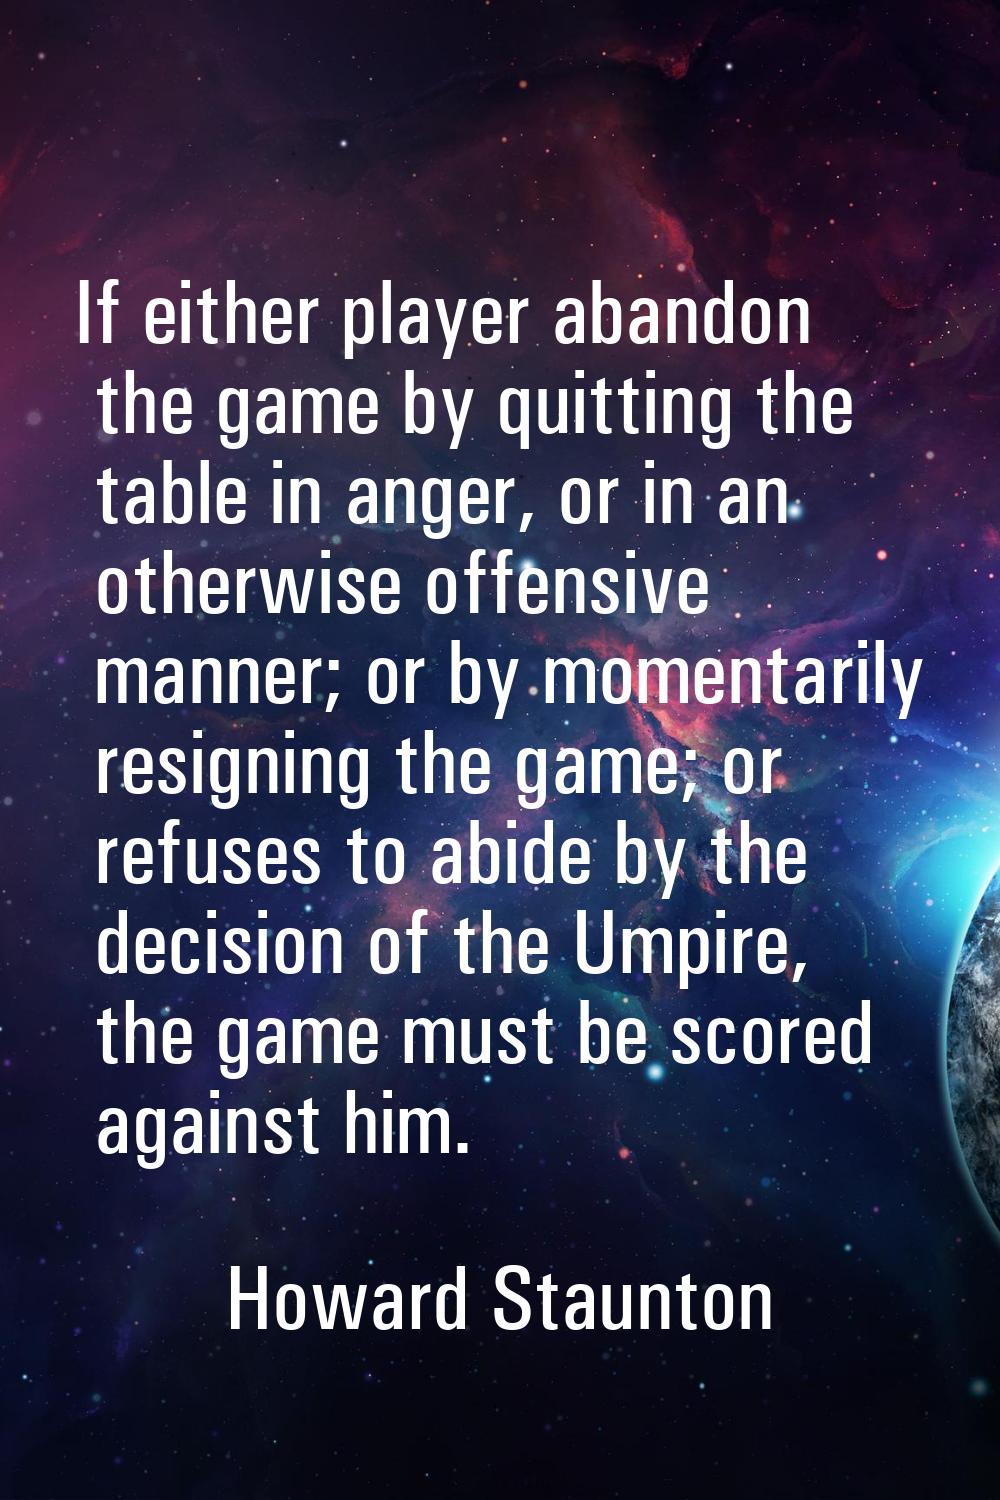 If either player abandon the game by quitting the table in anger, or in an otherwise offensive mann